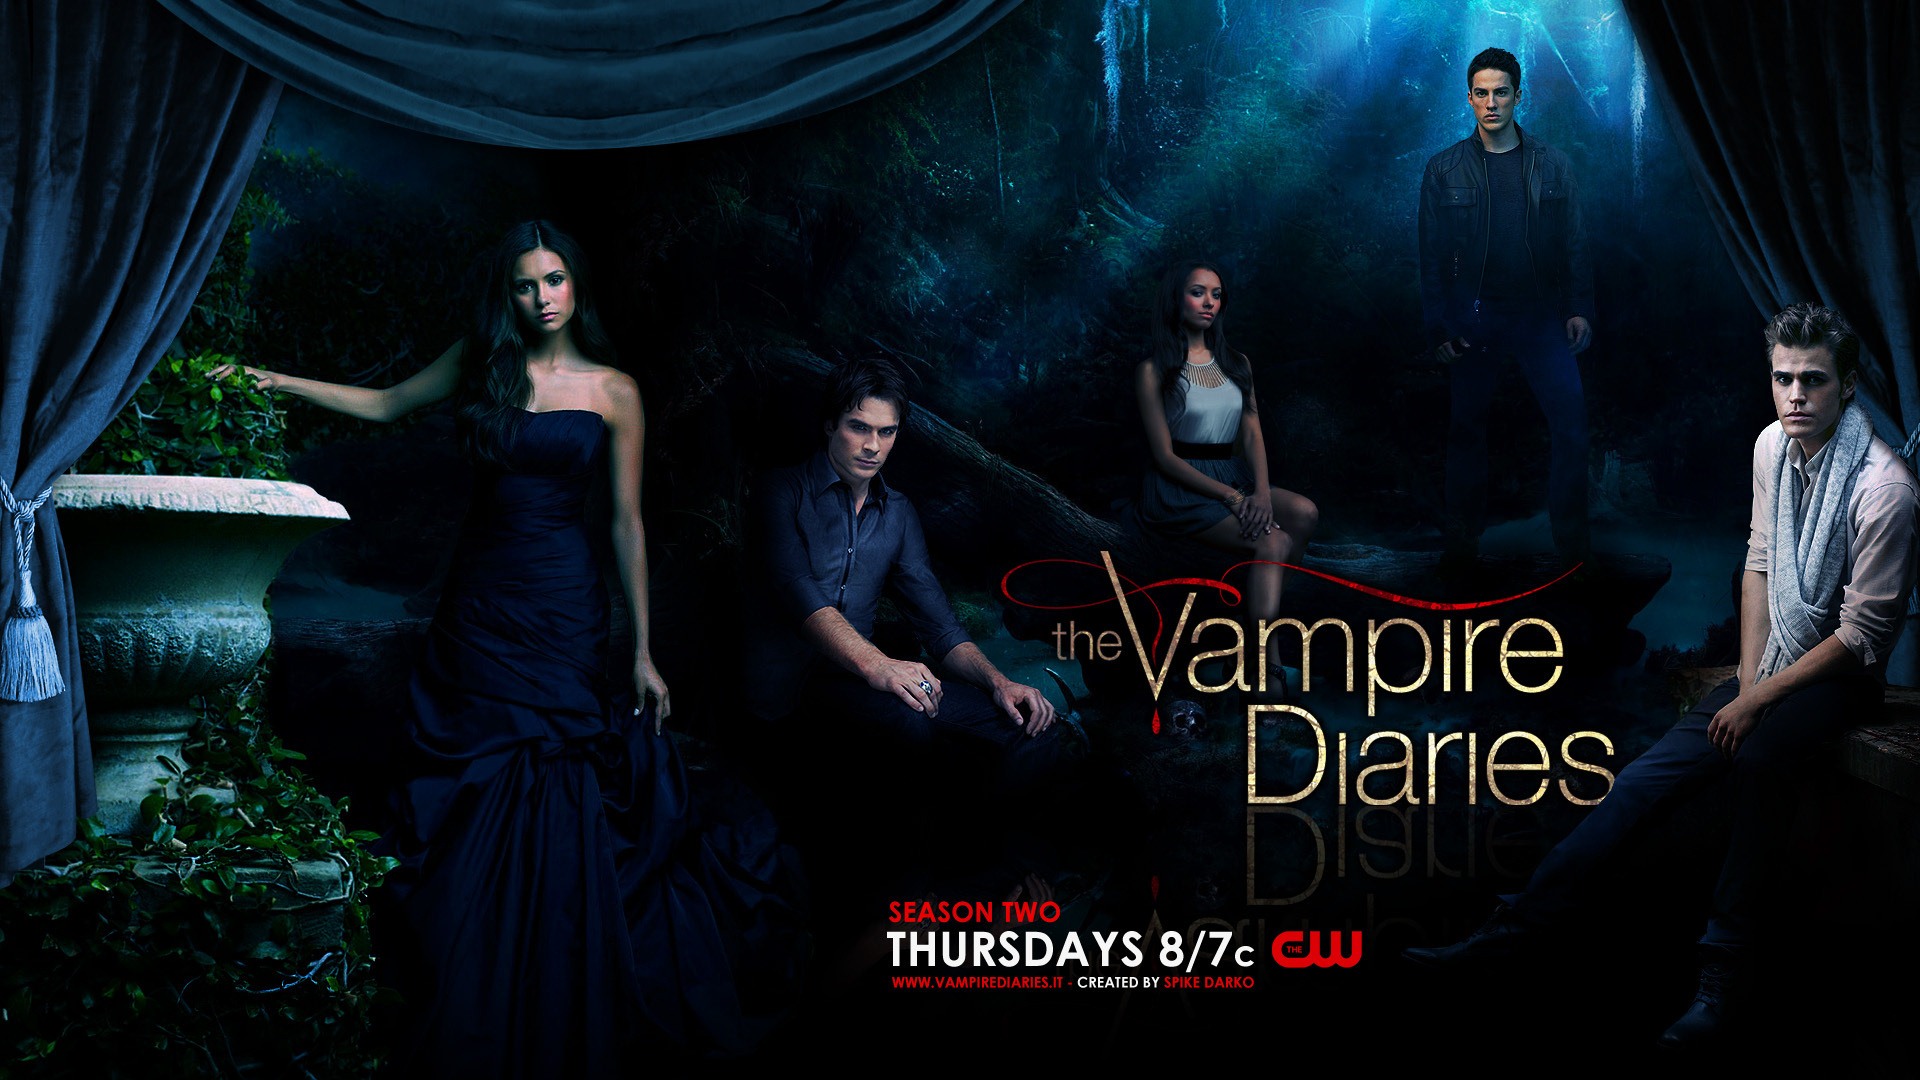 The Vampire Diaries HD wallpapers #18 - 1920x1080